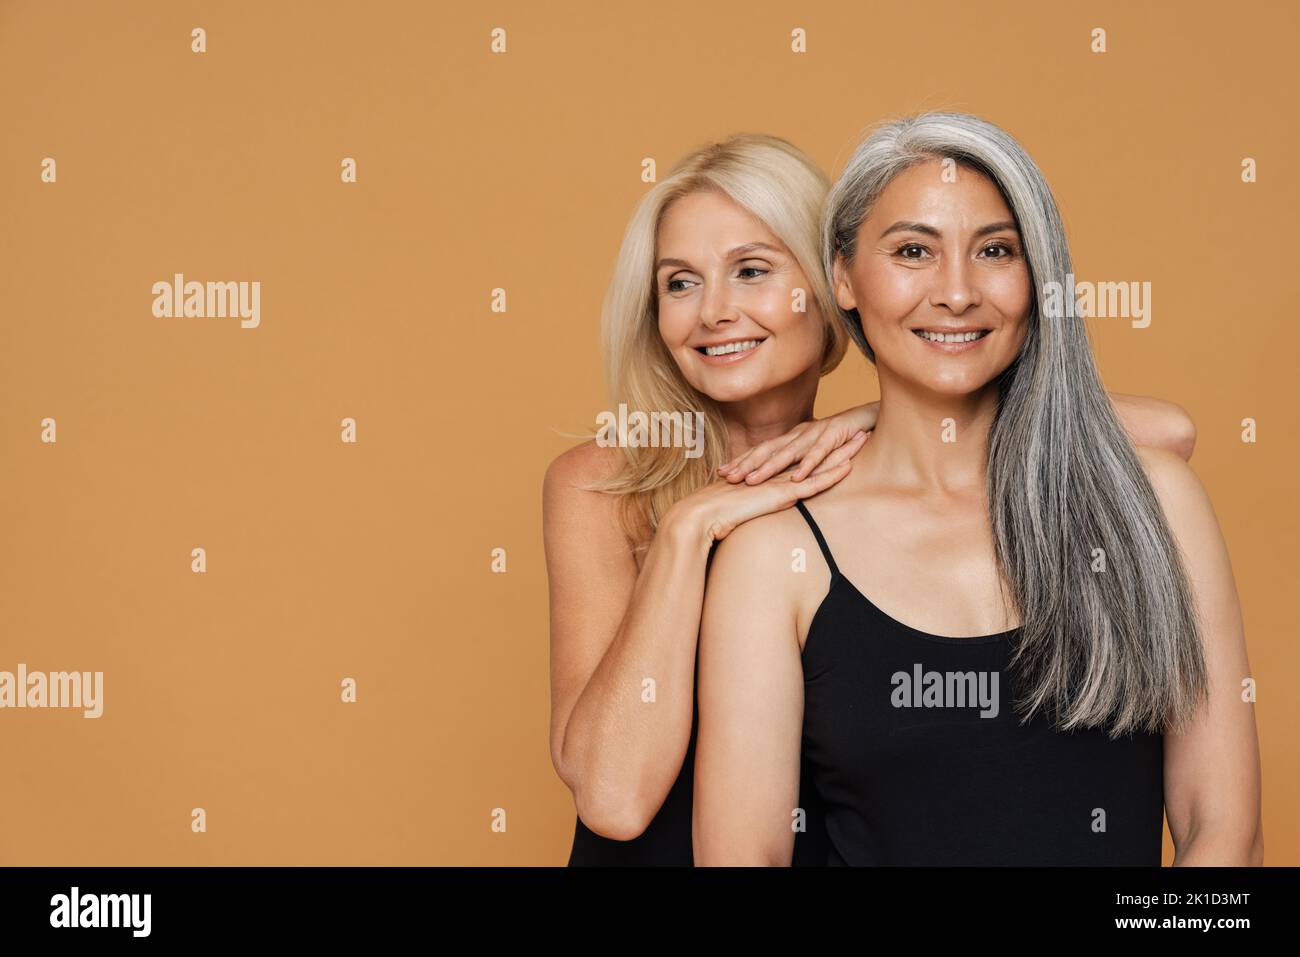 Mature multiracial beautiful women wearing bodysuits smiling and posing isolated over yellow background Stock Photo